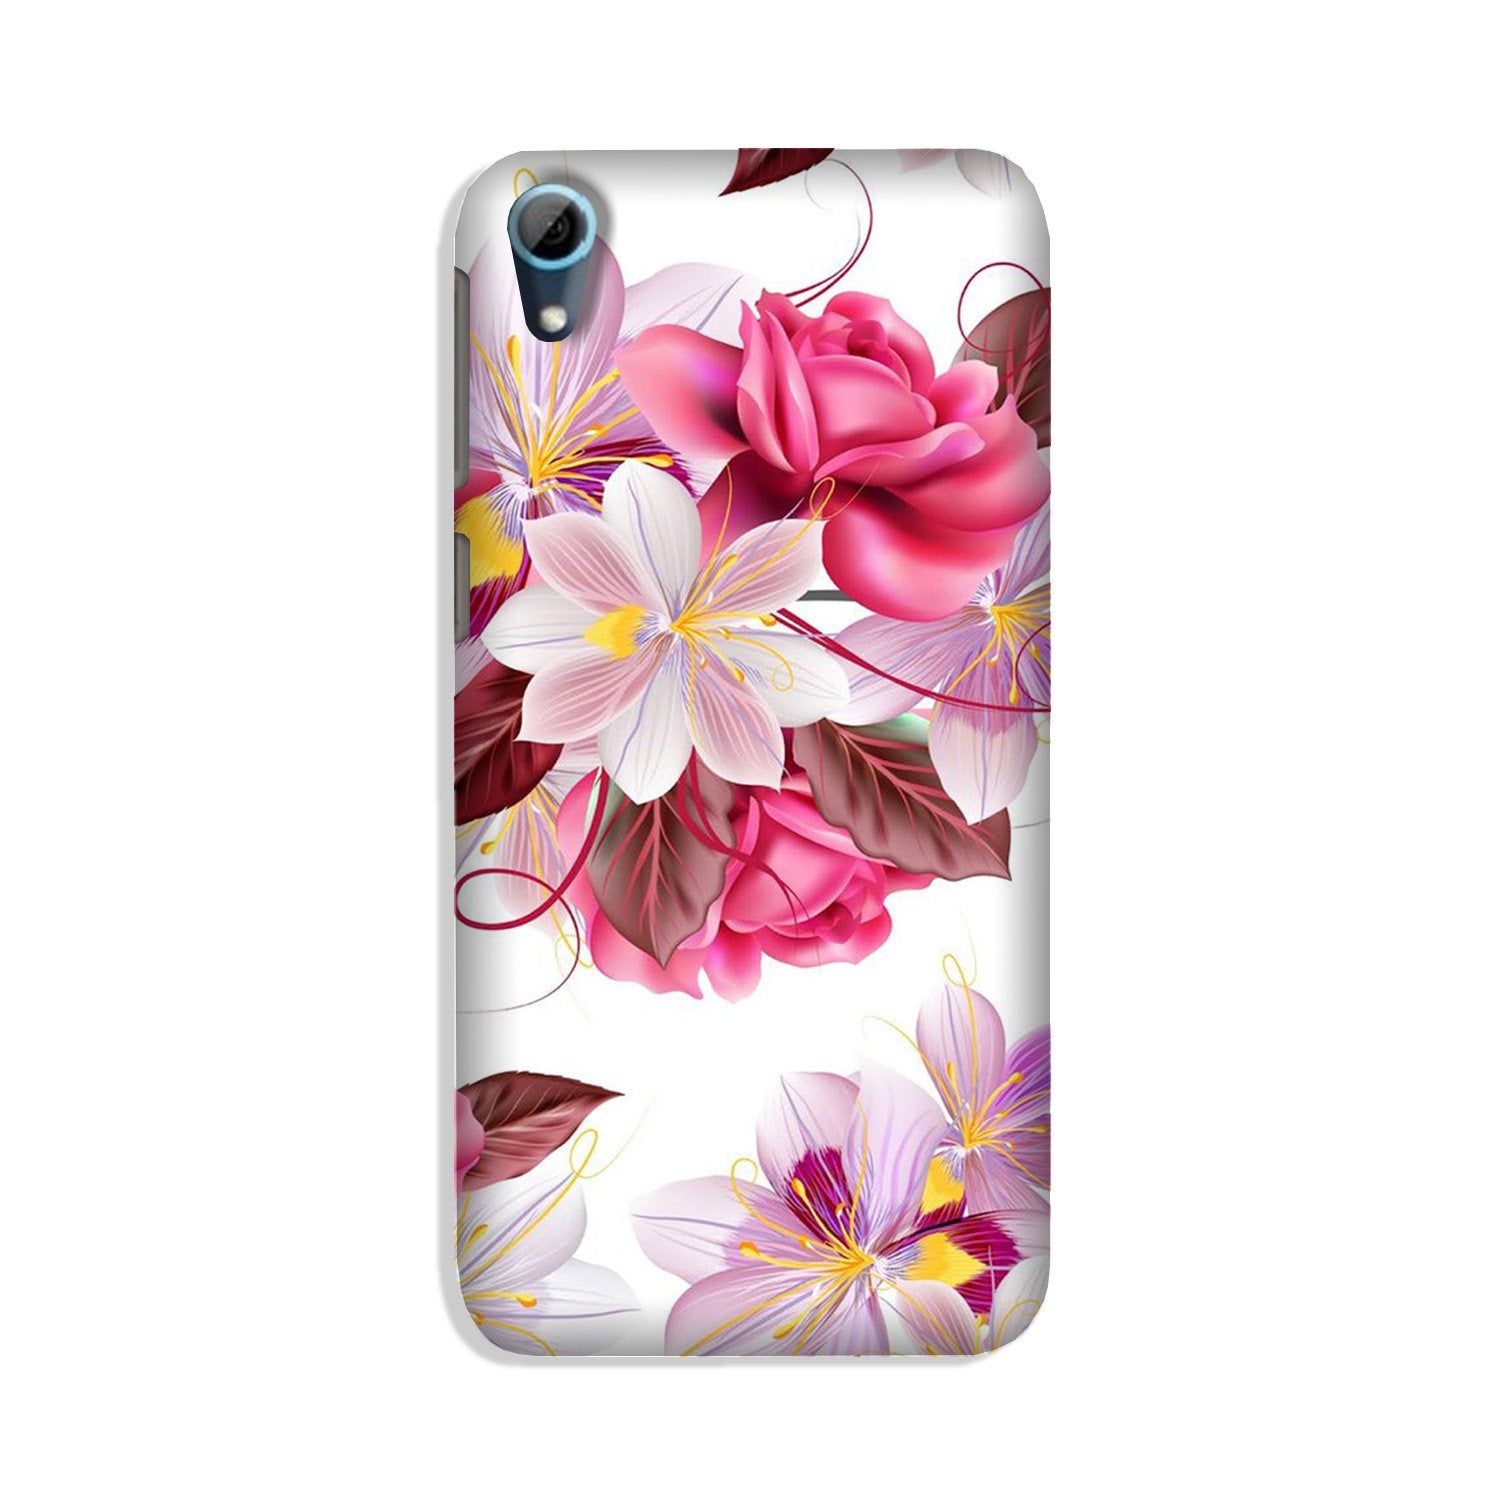 Beautiful flowers Case for HTC Desire 826